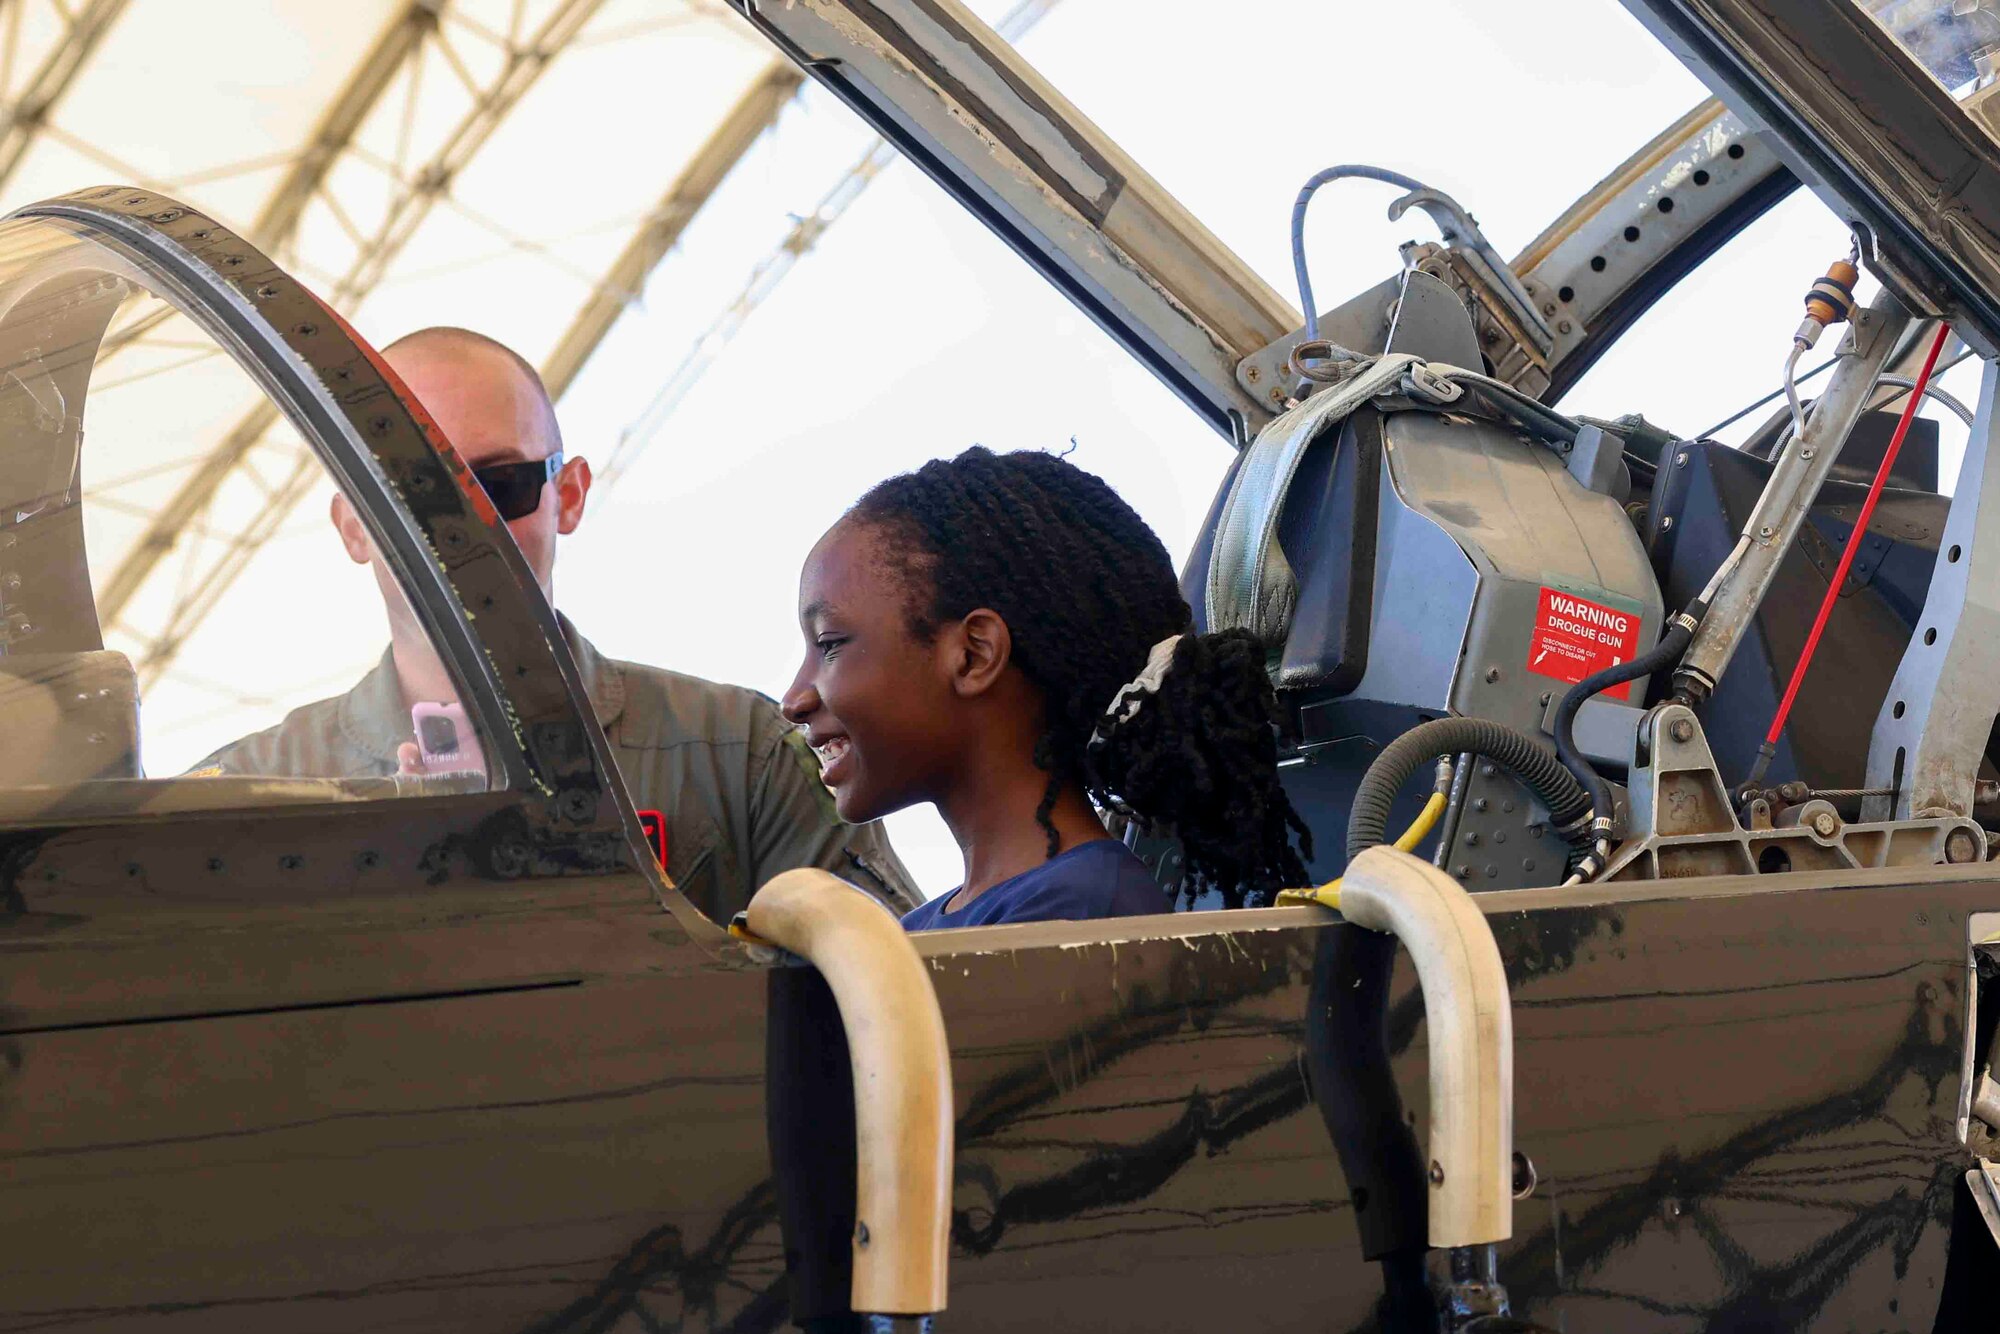 U.S. Air Force Lt. Col. Cole, 1st Reconnaissance Squadron pilot, shows Azalia Mutebi, a student with For Inspiration and Recognition of Science and Technology (FIRST), the various controls in the cockpit of a T-38 Talon during a base tour Aug. 3, 2023, at Beale Air Force Base, California.